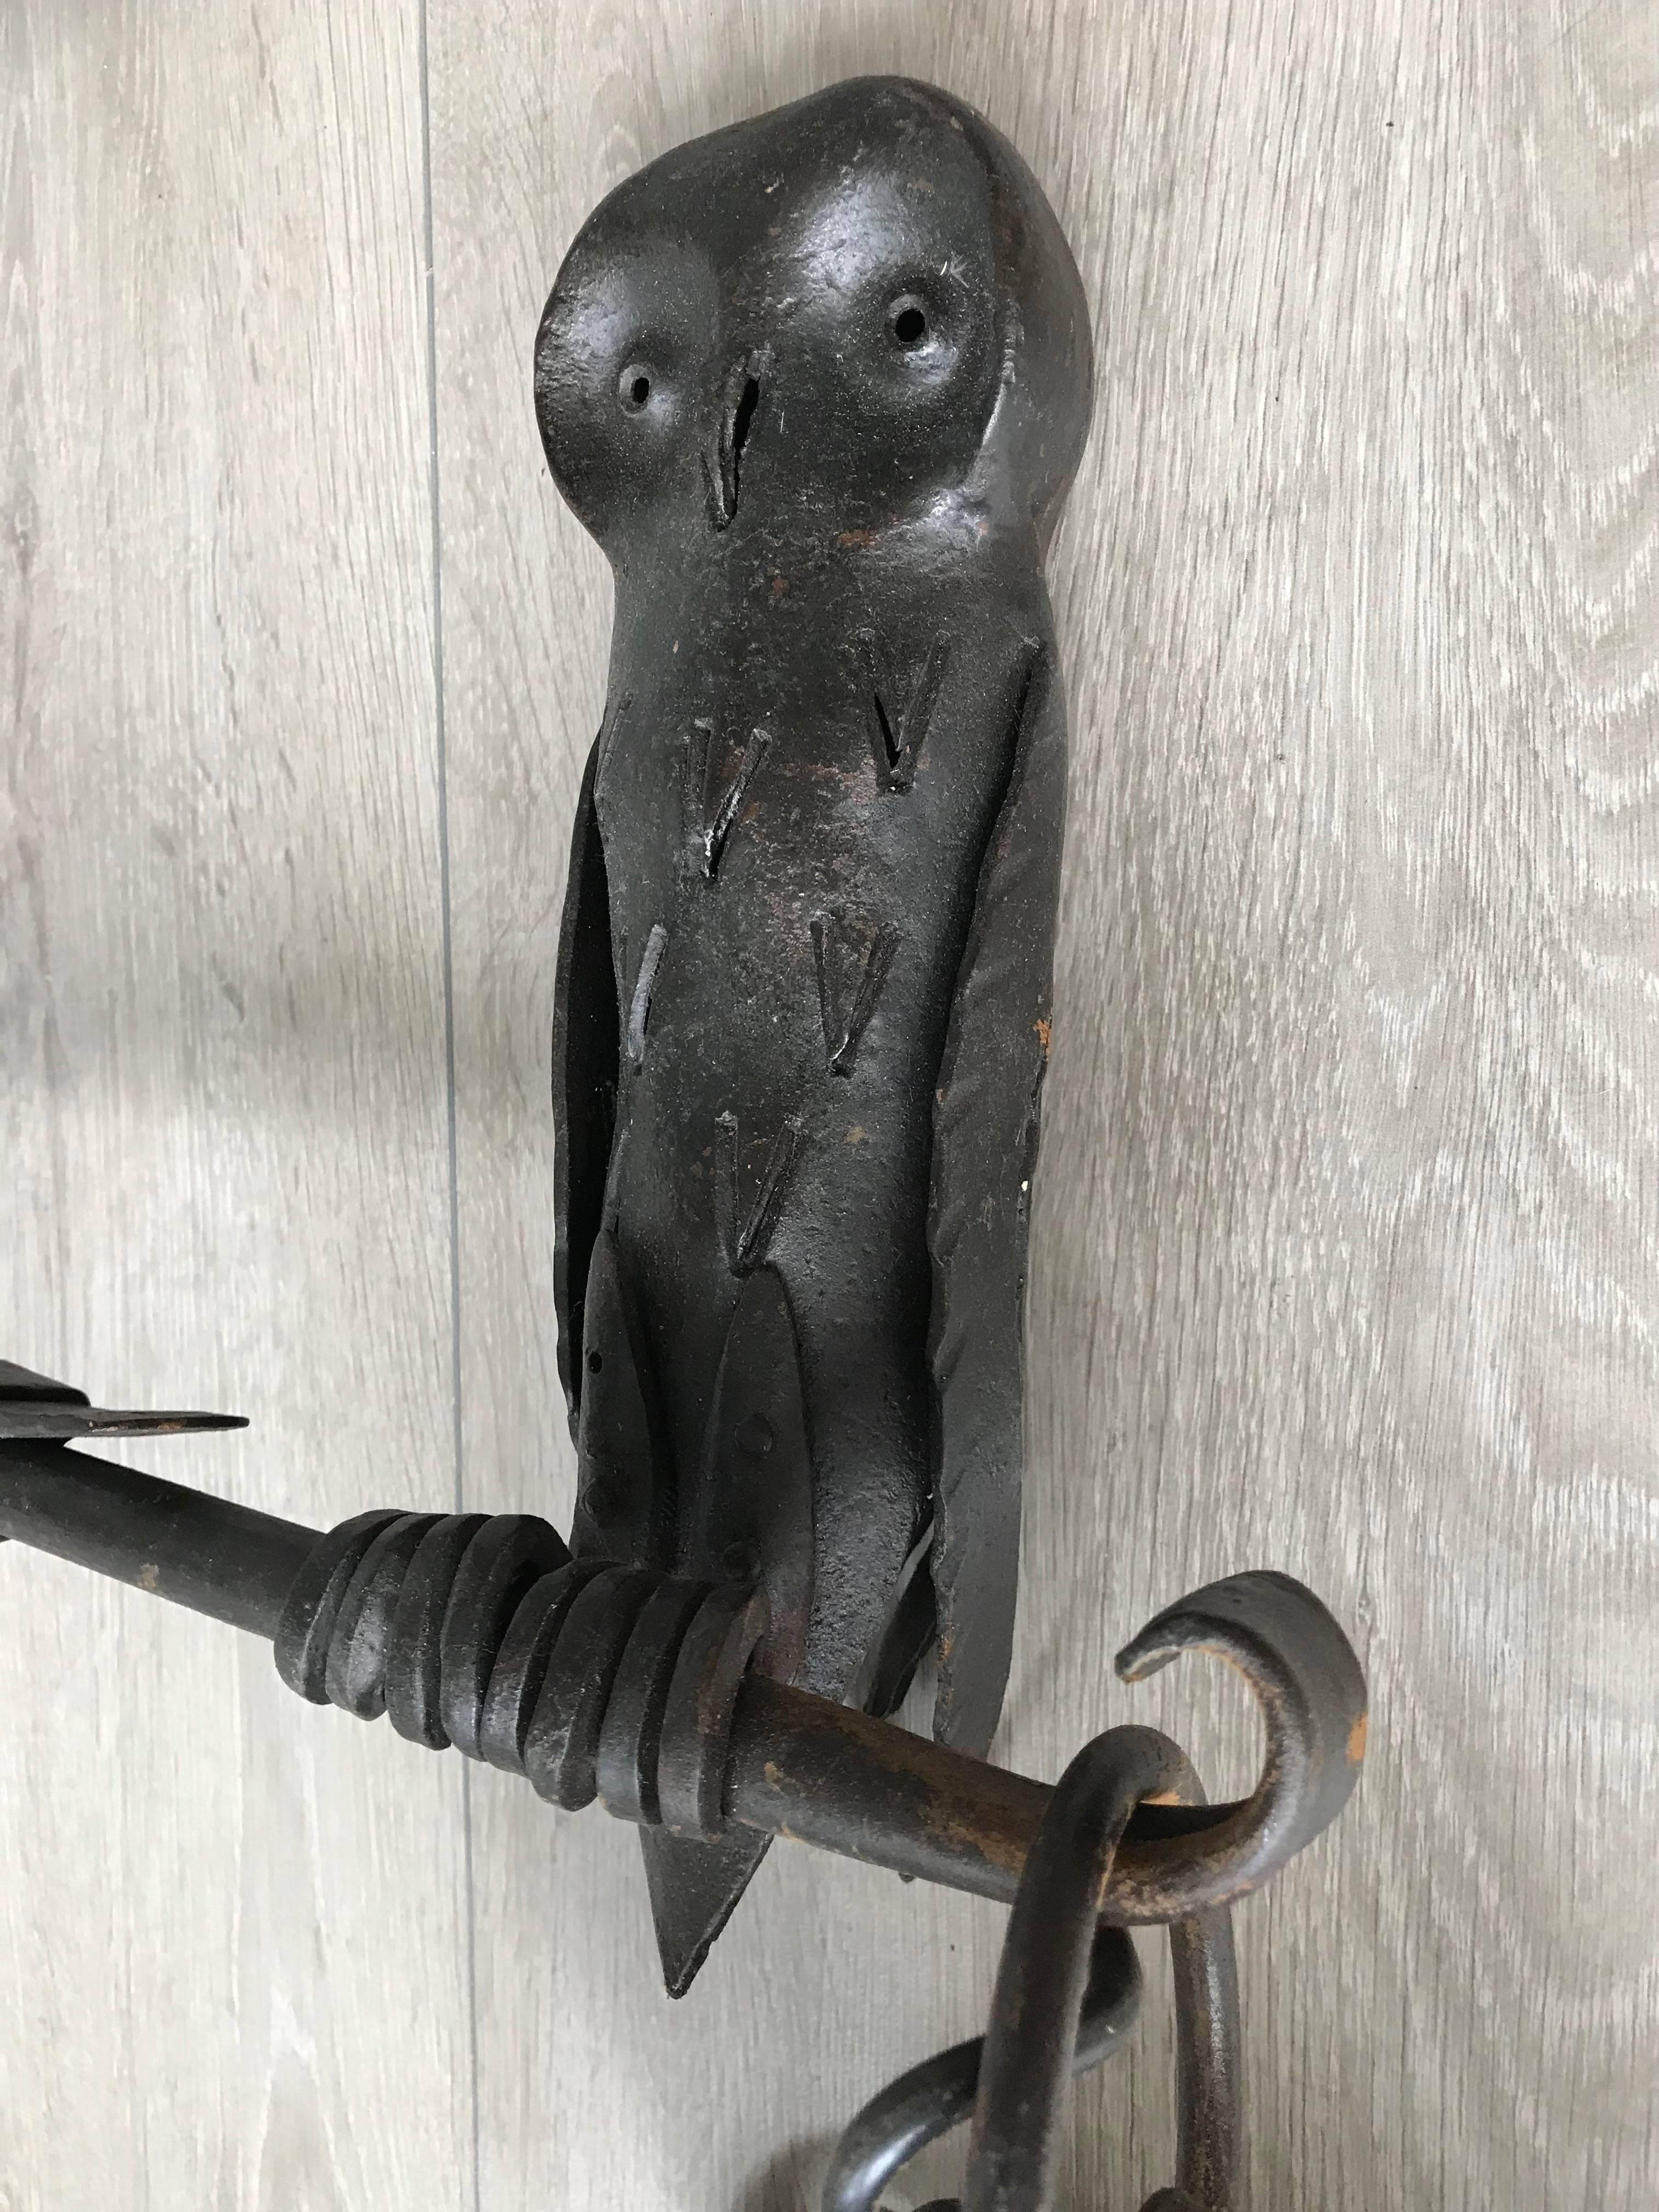 Forged Arts & Crafts Style Wrought Iron Outdoor Wall Lamp / Sconce with Owl Sculpture